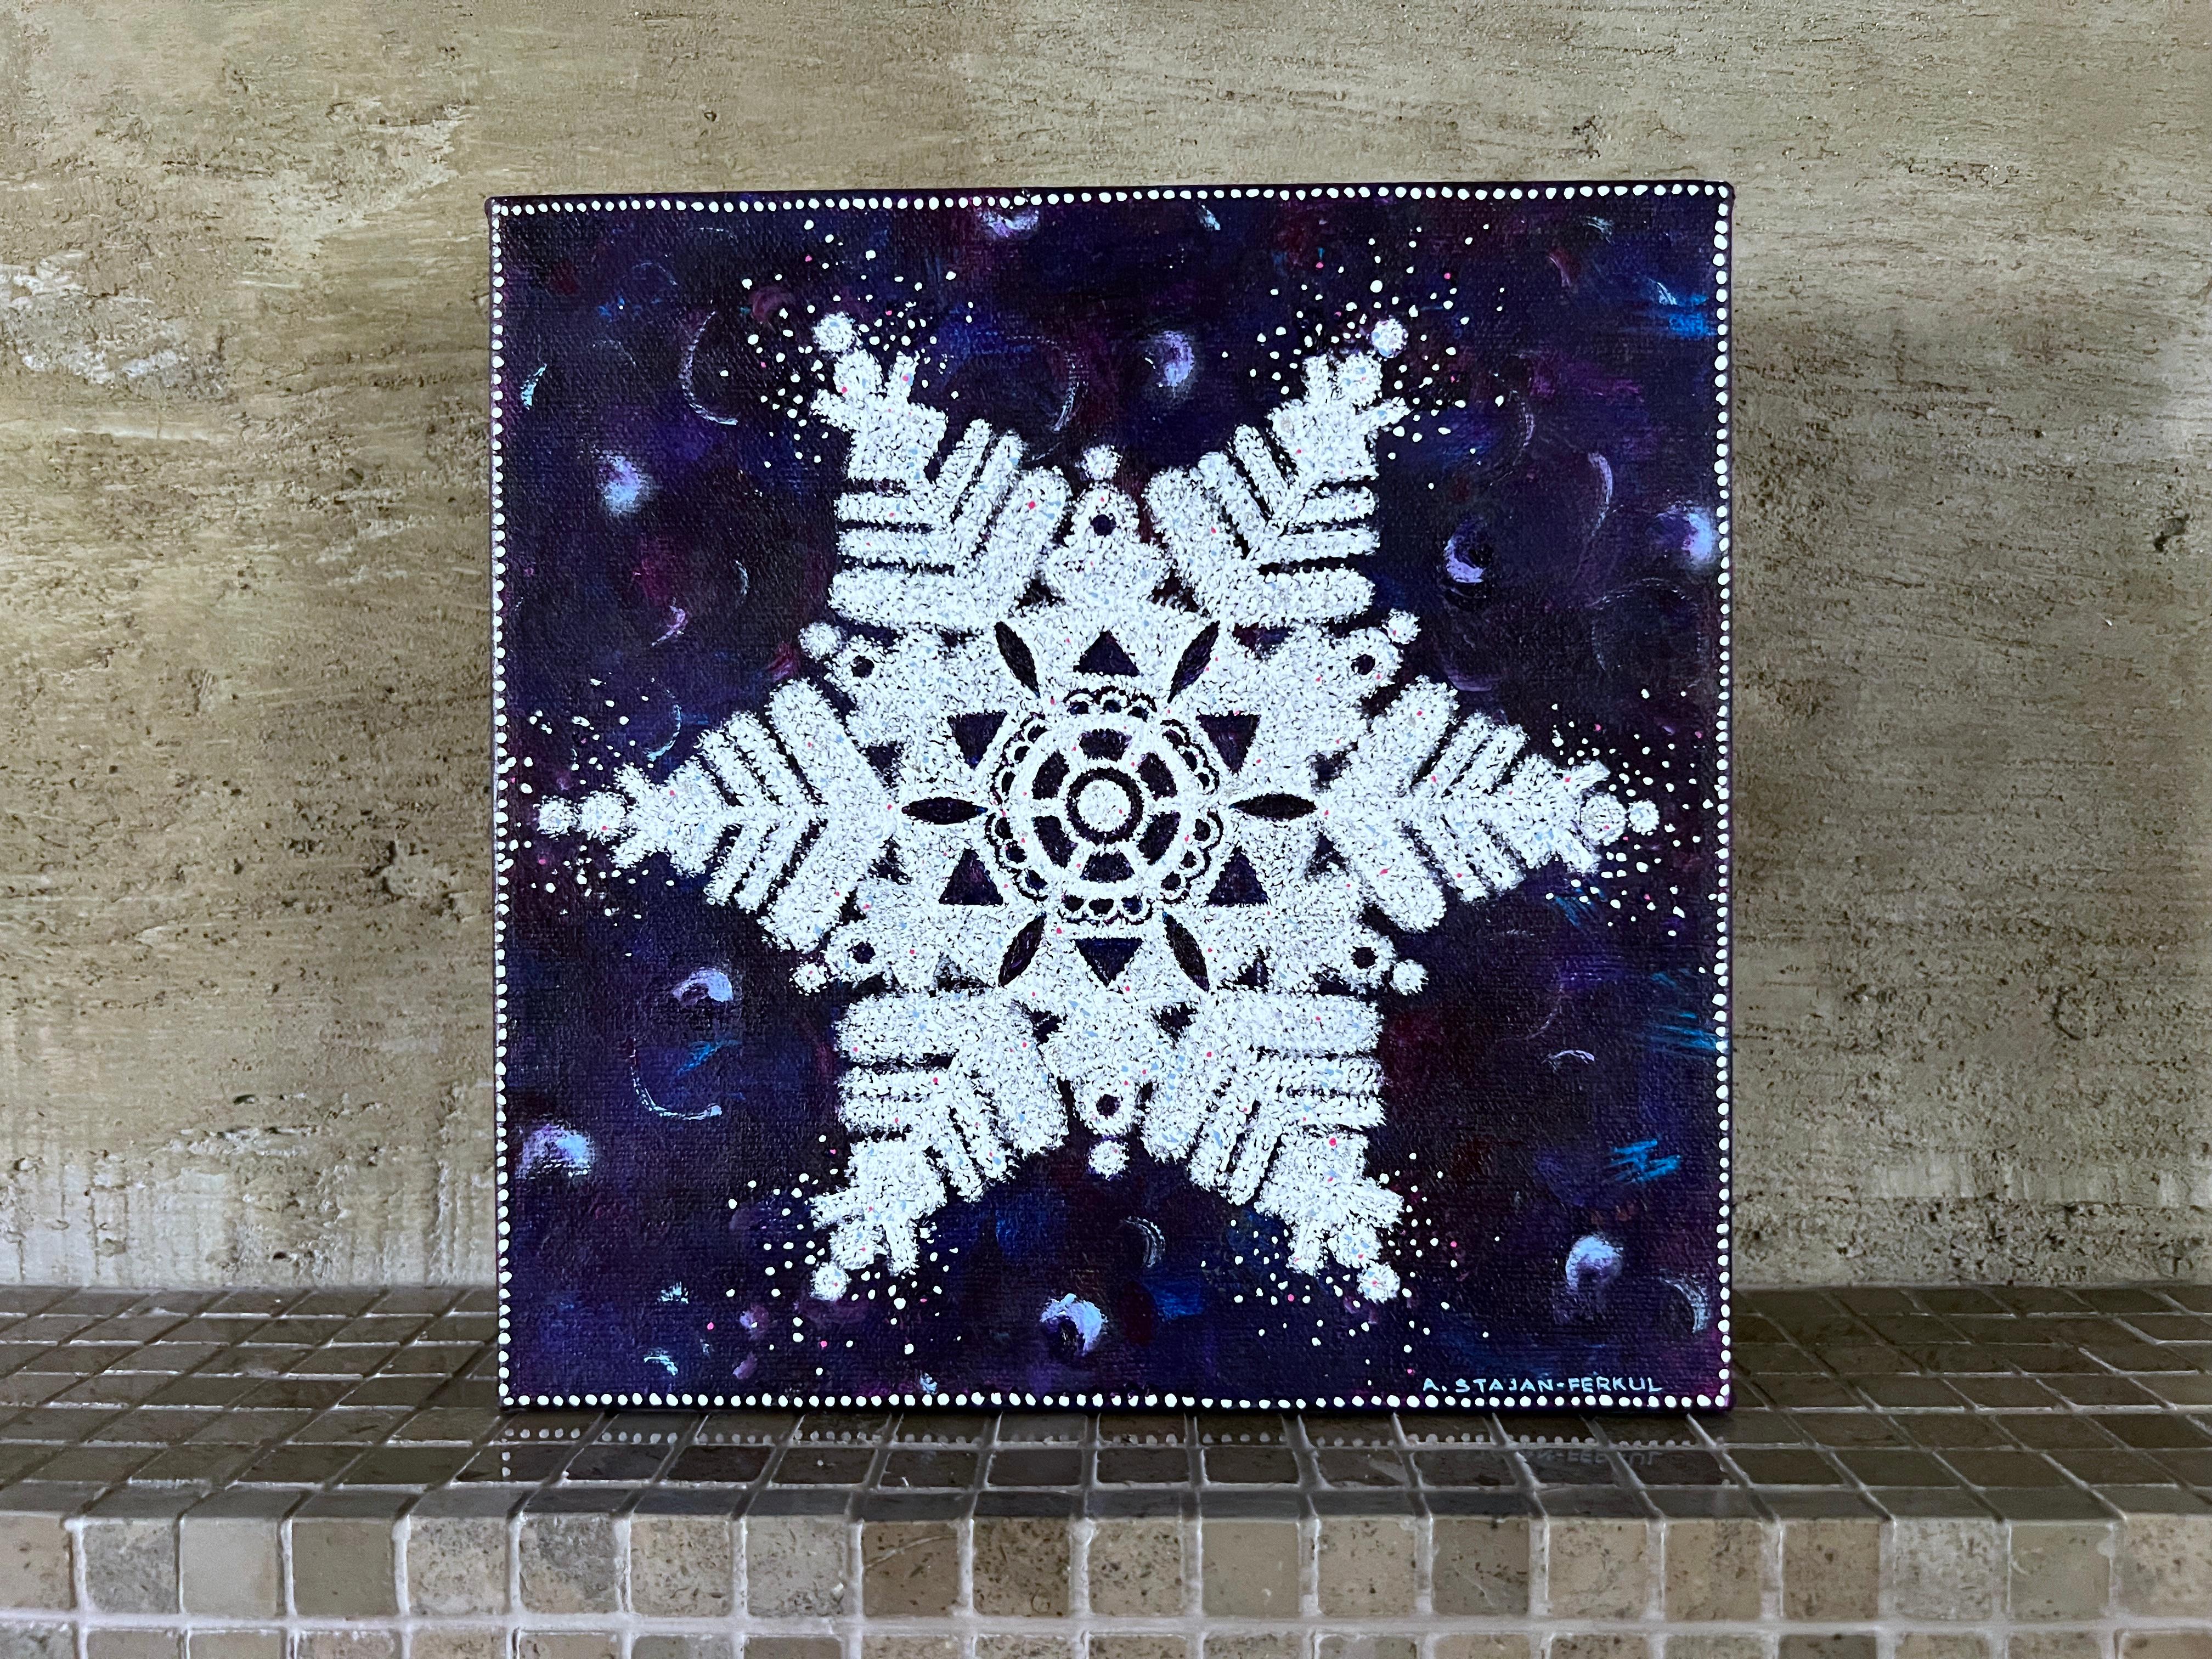 This delicate and intricate snowflake glistens softly against a serene winter background. The meticulous details capture the ethereal beauty of a unique snowflake, also emulating a star. Using acrylic paint, emphasis is on detail, pattern and